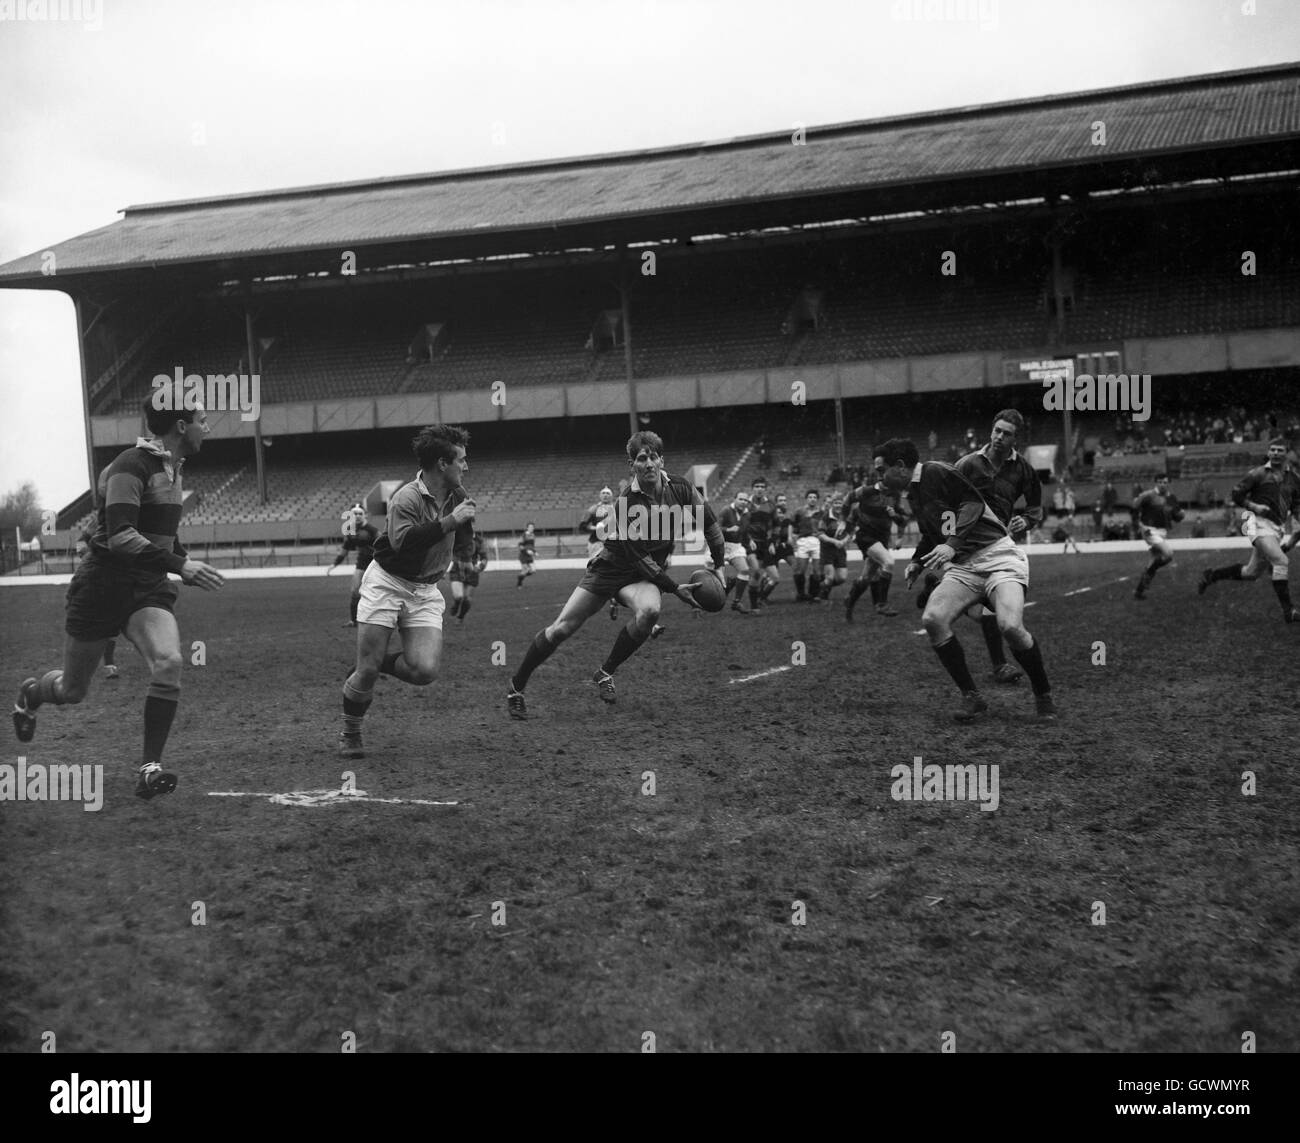 Rugby Union - Harlequins v Bedford - Twickenham. DP Rogers of Bedford about to pass the ball Stock Photo